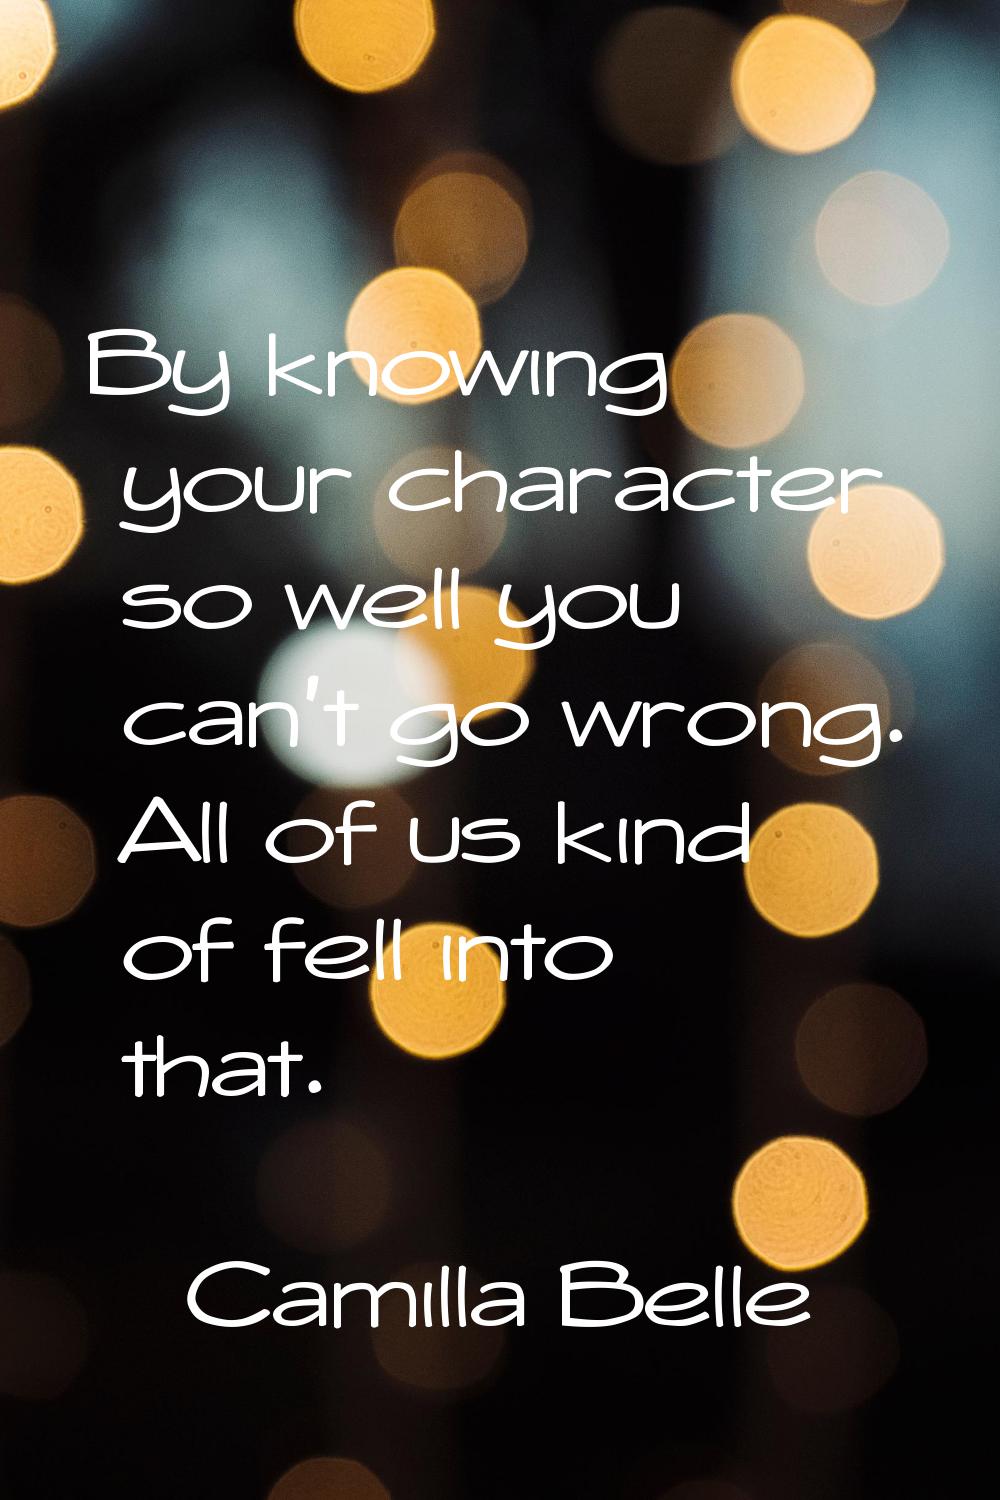 By knowing your character so well you can't go wrong. All of us kind of fell into that.